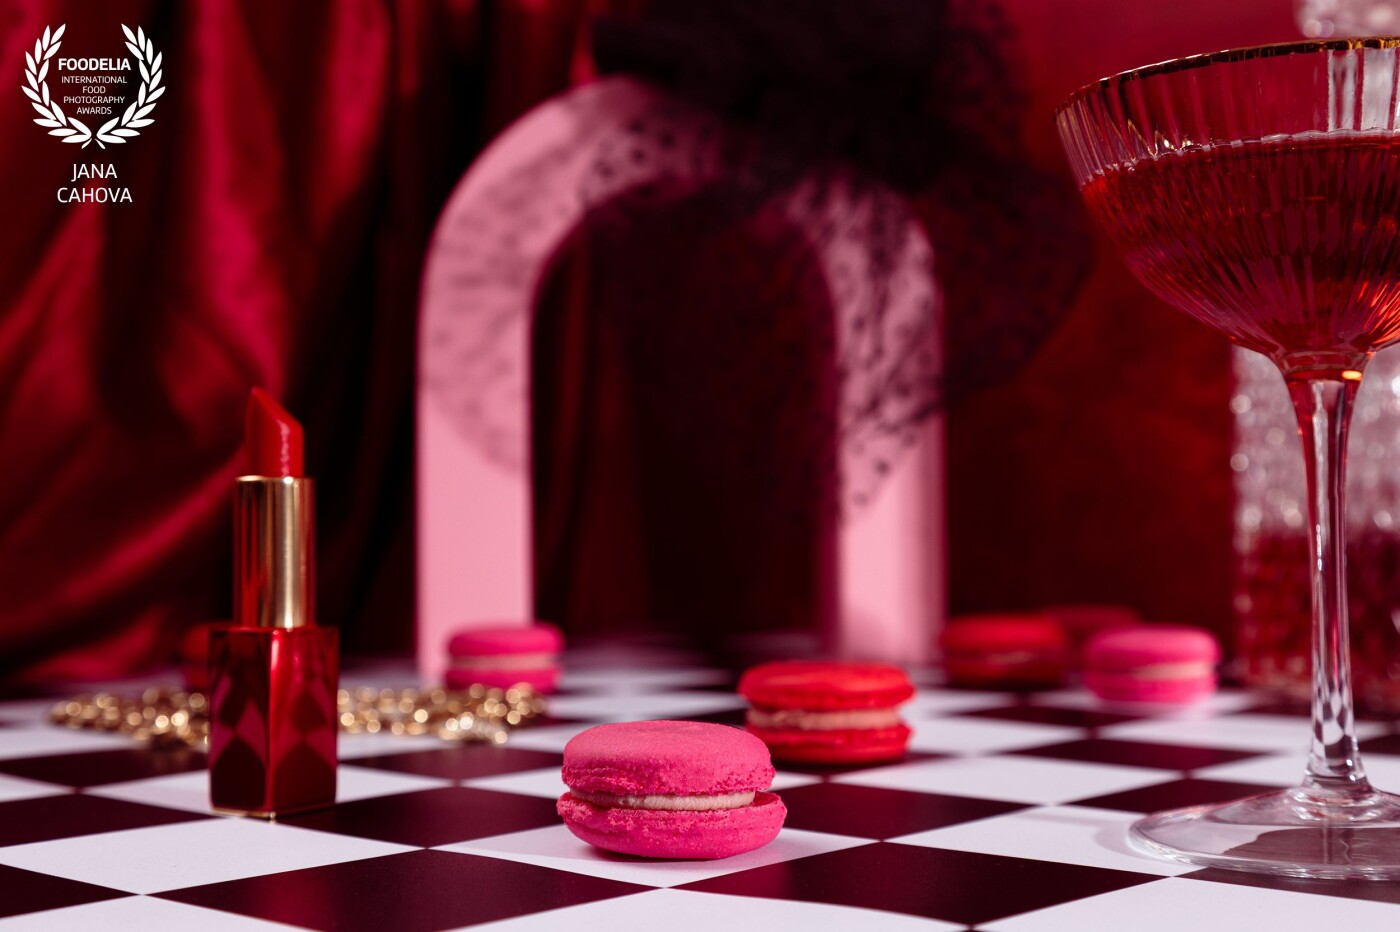 A fun photoshoot inspired by Alice in wonderland/ Emily in Paris. Red and pink macarons, petite Arc de triomphe, chessboard, red lipstick and glass of wine. …<br />
Captured in my studio with Godox lights.